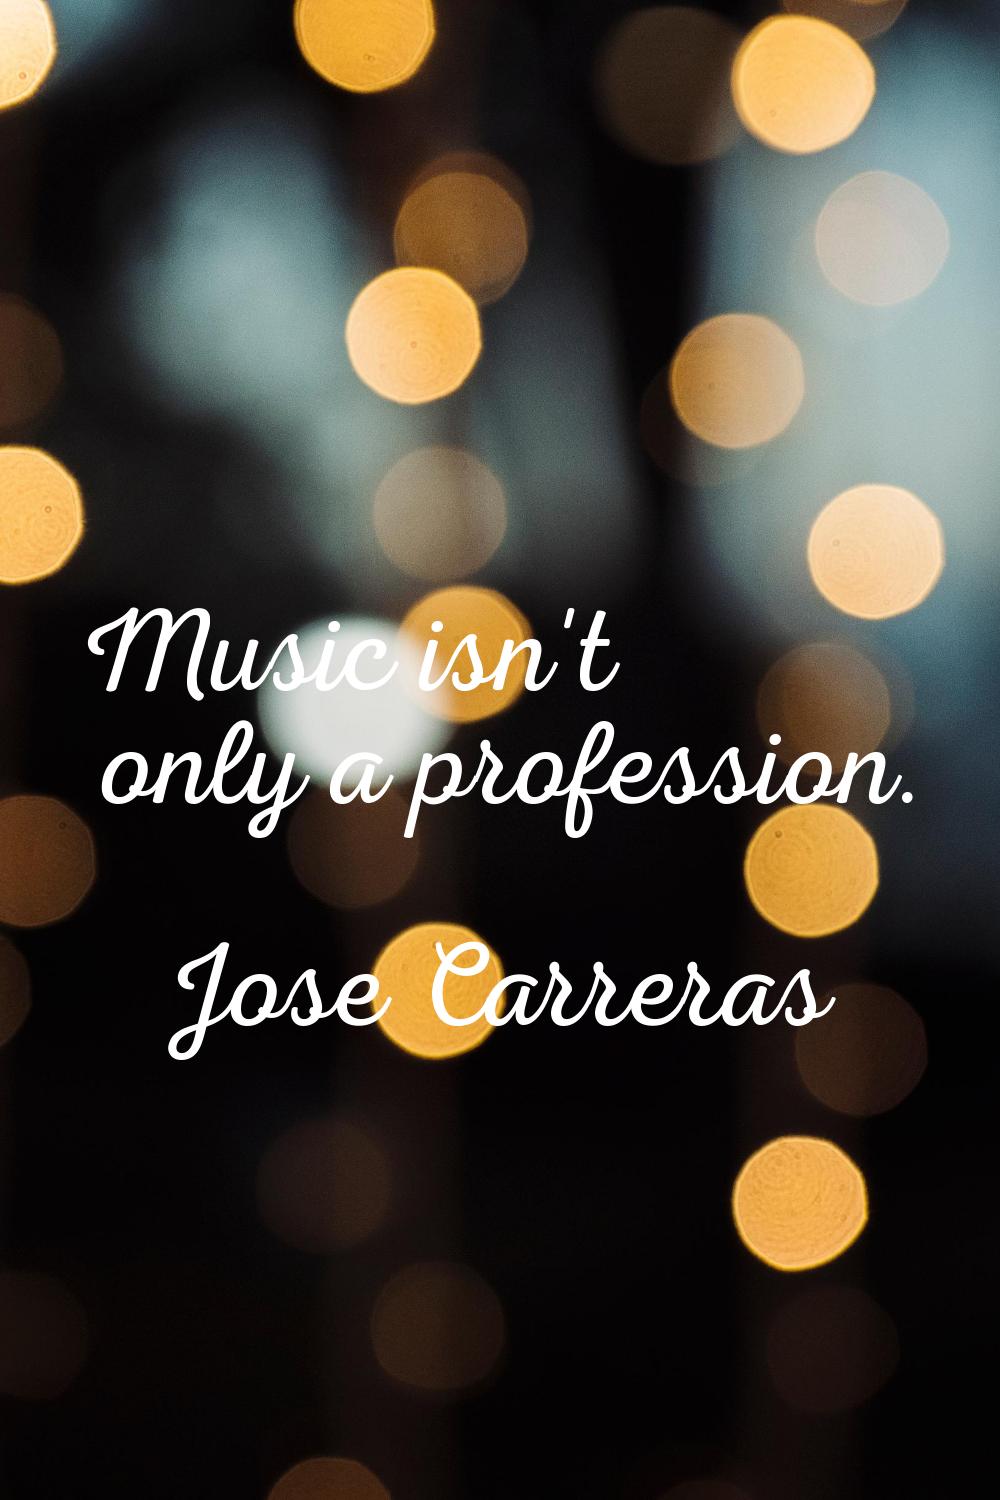 Music isn't only a profession.